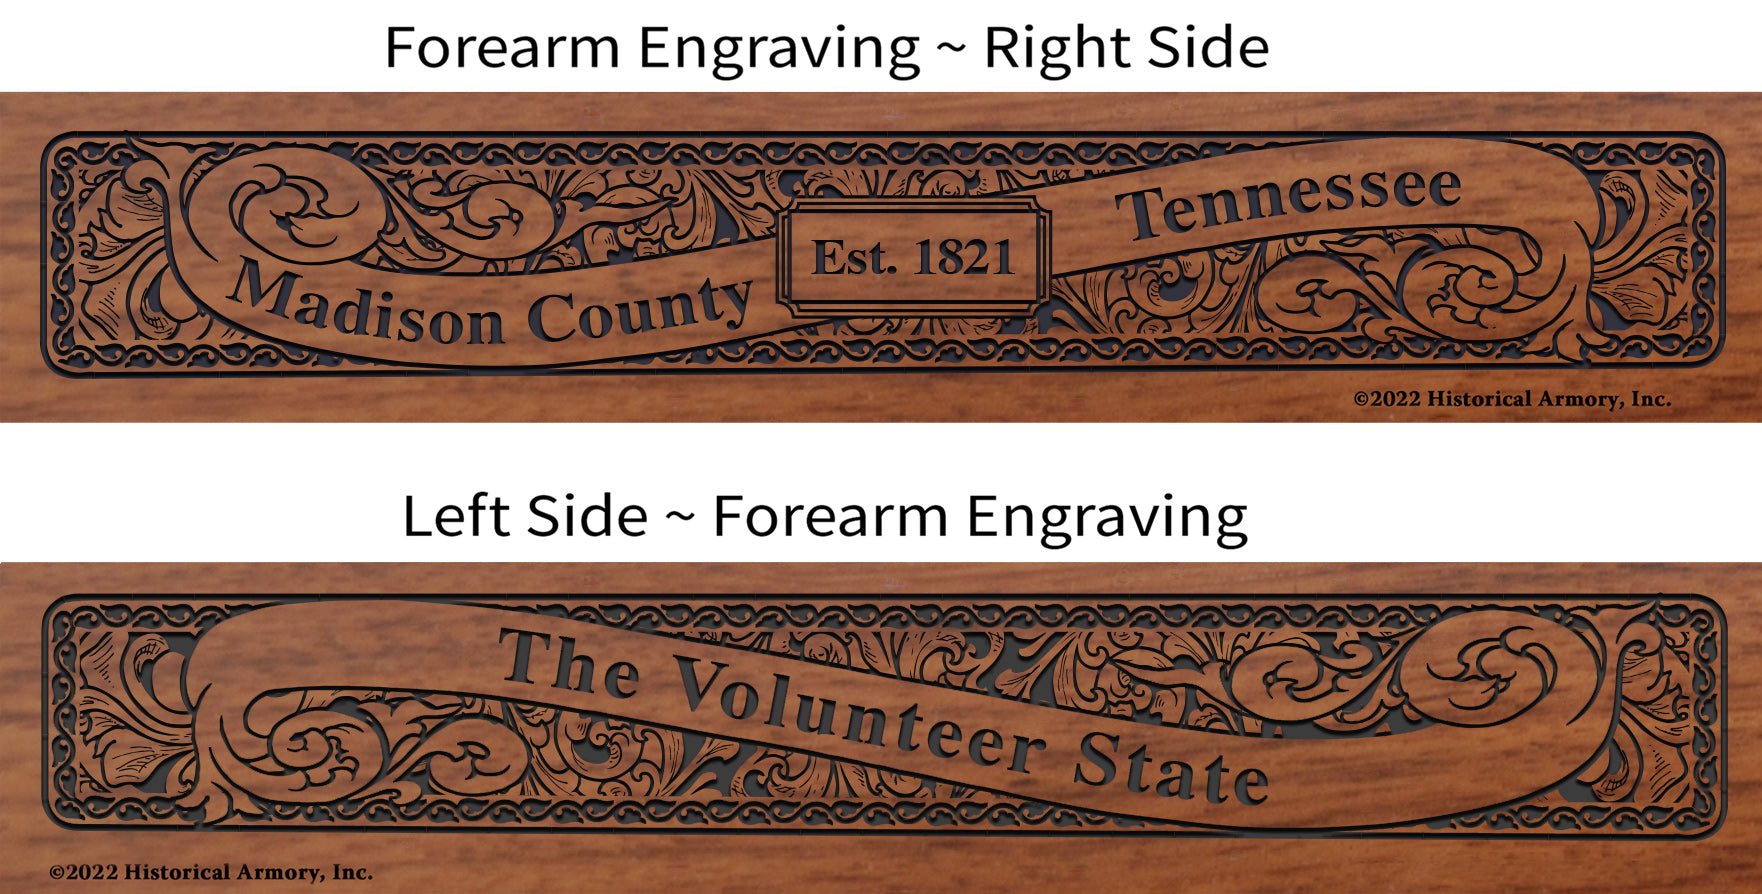 Madison County Tennessee Engraved Rifle Forearm